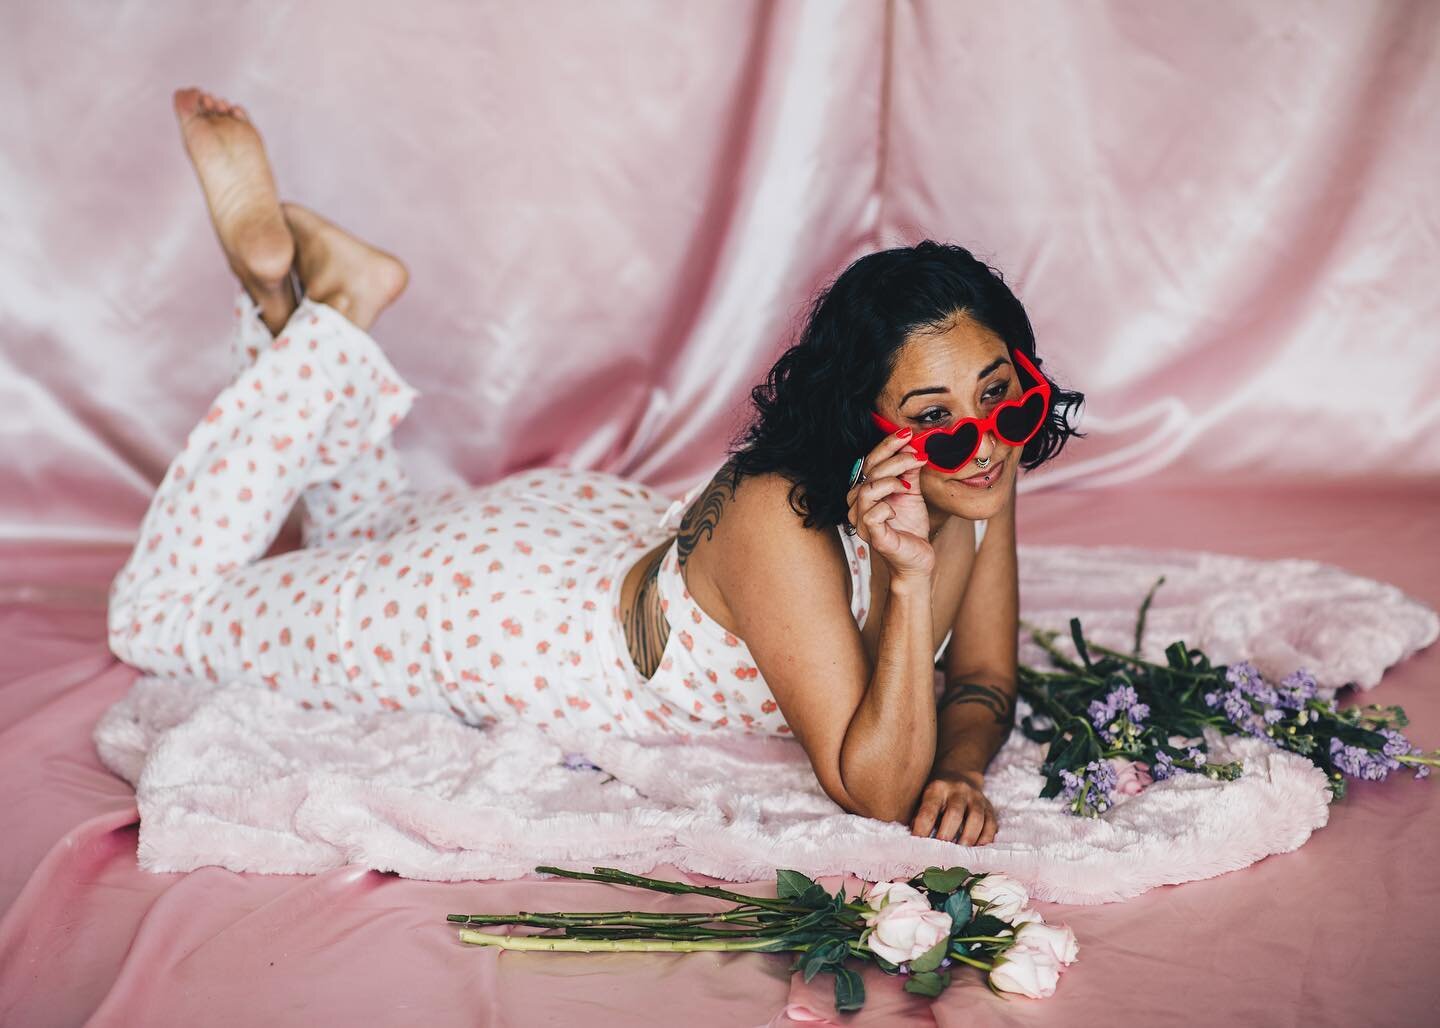 More flirty pink fun featuring @reflectlightlove! Even though I&rsquo;m all about the classic pose peeking over the heart shaped glasses, I find it endlessly fascinating that it developed as imagery for the film Lolita against the author&rsquo;s wish